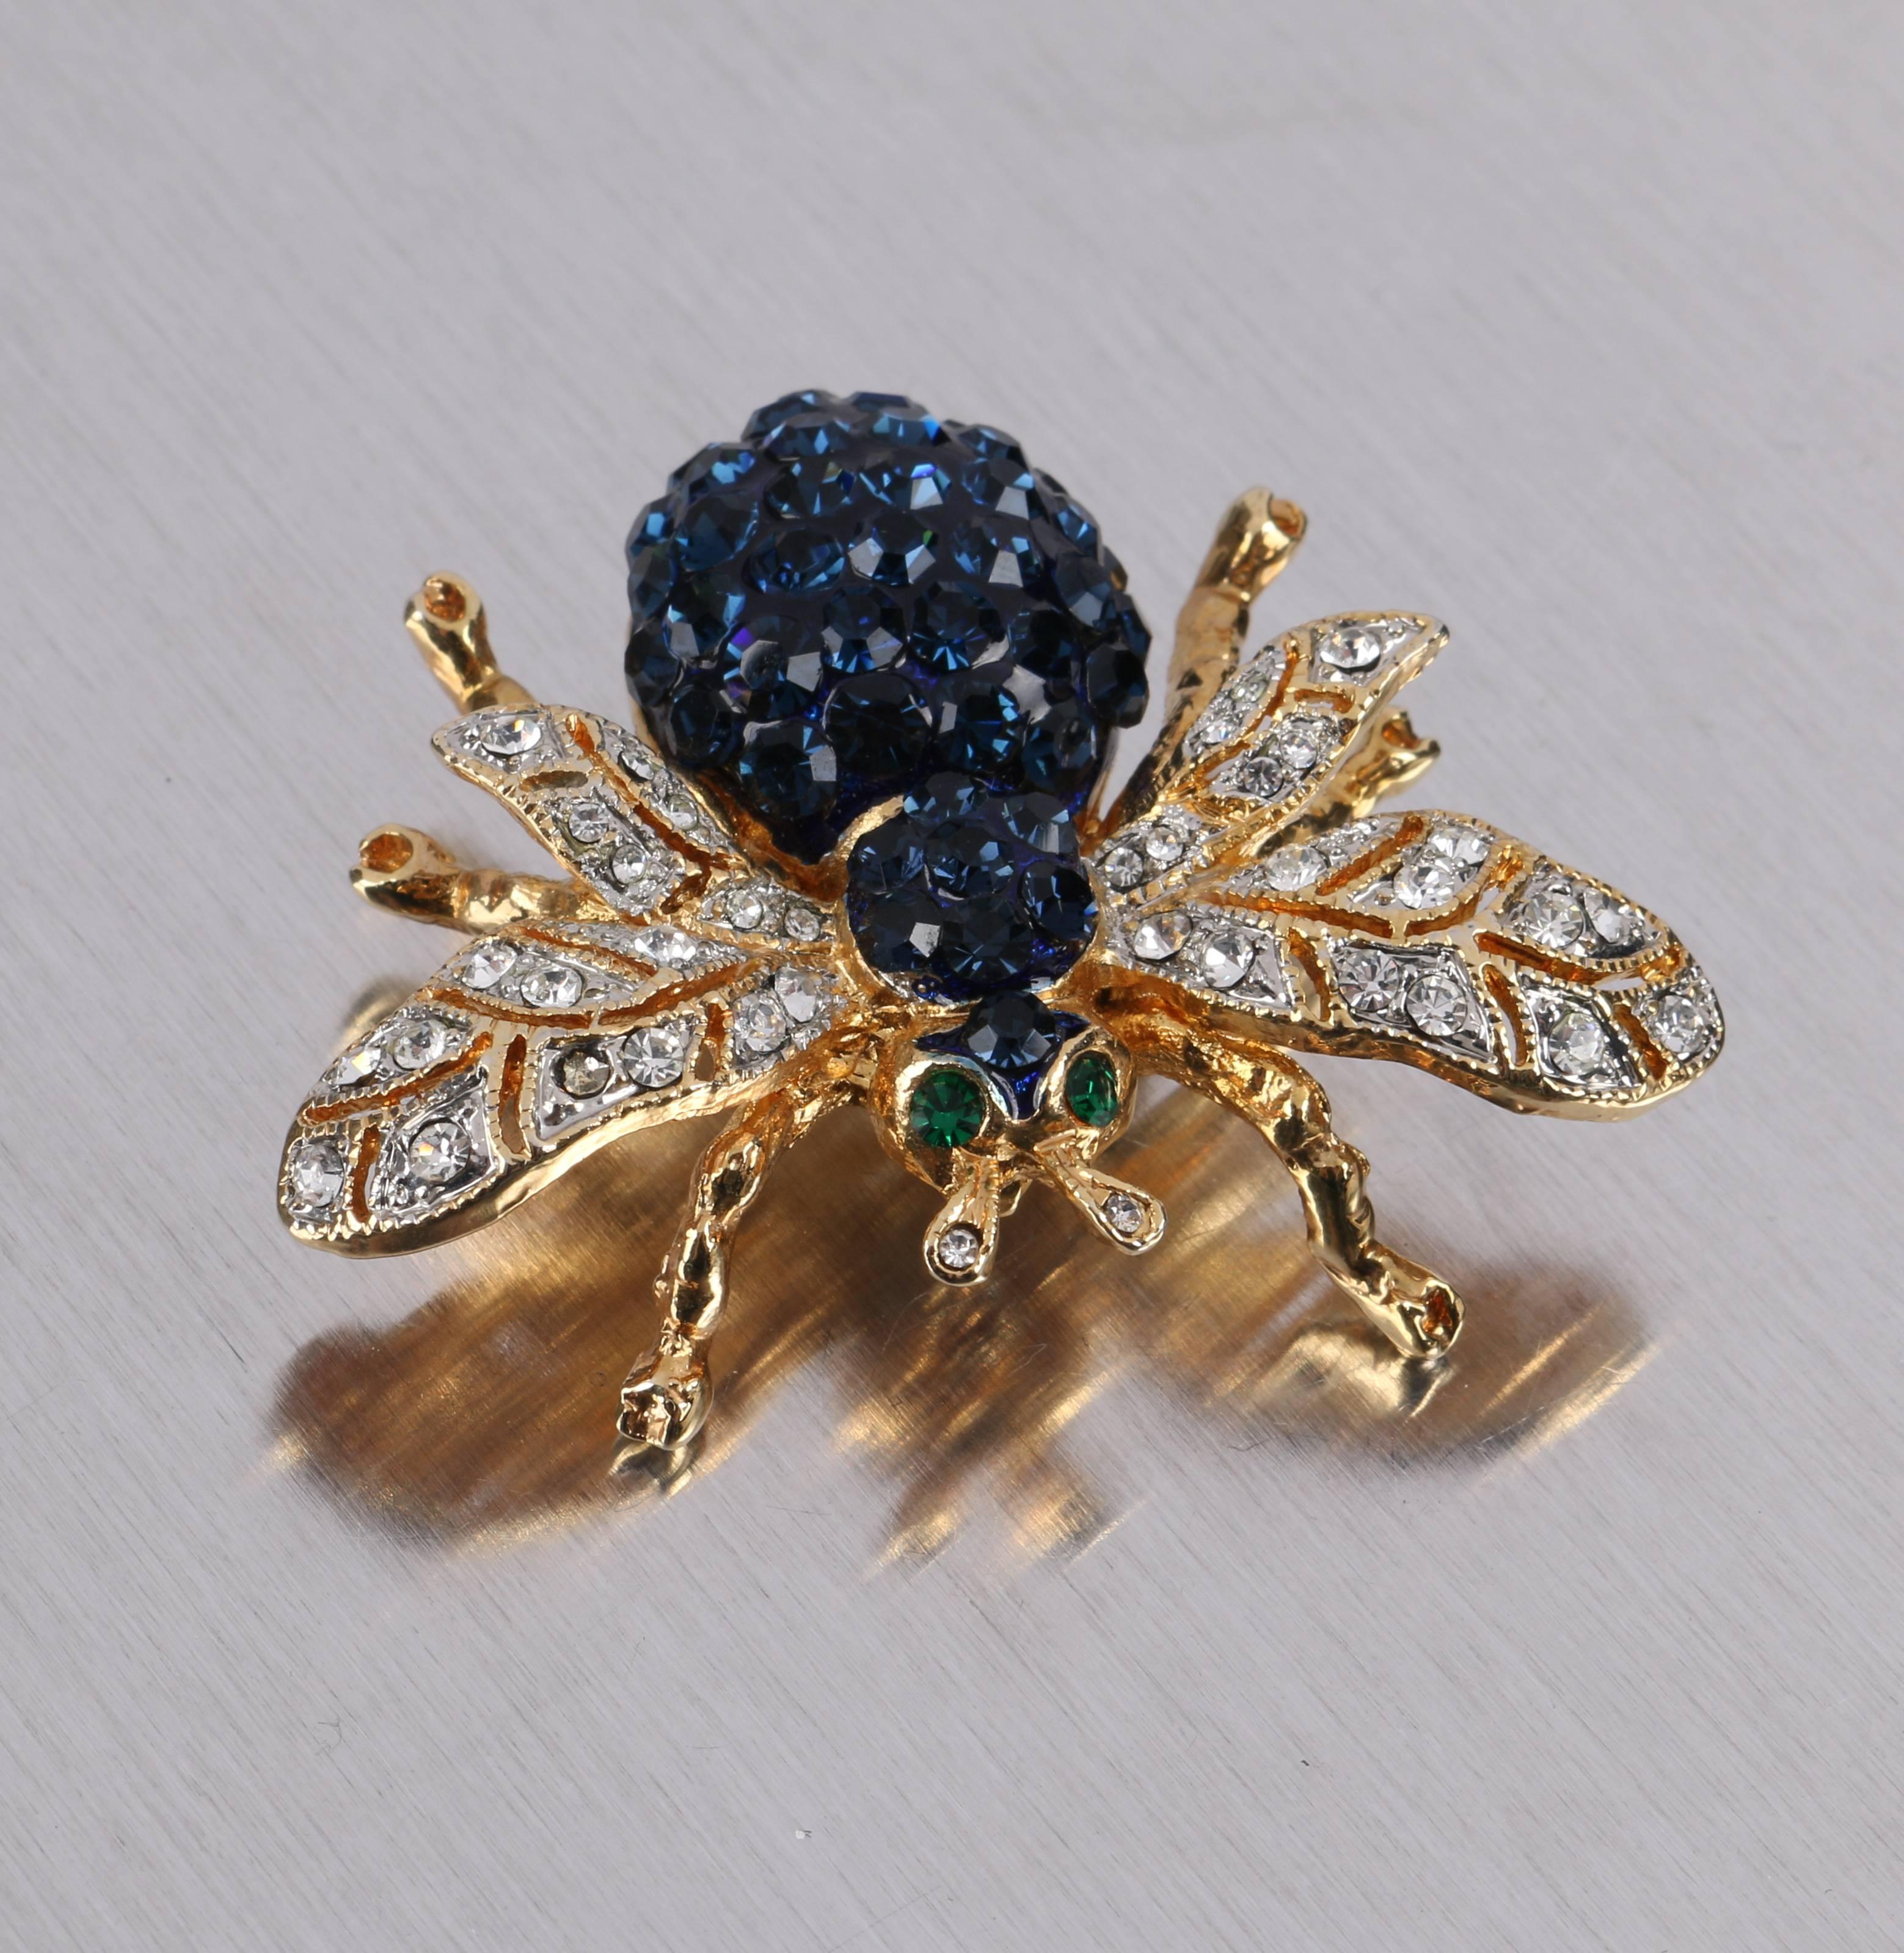 c.1990's sapphire blue crystal rhinestone and gold-toned bee figural brooch. Gold-toned metal body with pave set rhinestone crystals throughout. Cut work wings with clear pave set rhinestones. Segmented body with sapphire pave set rhinestones. Two